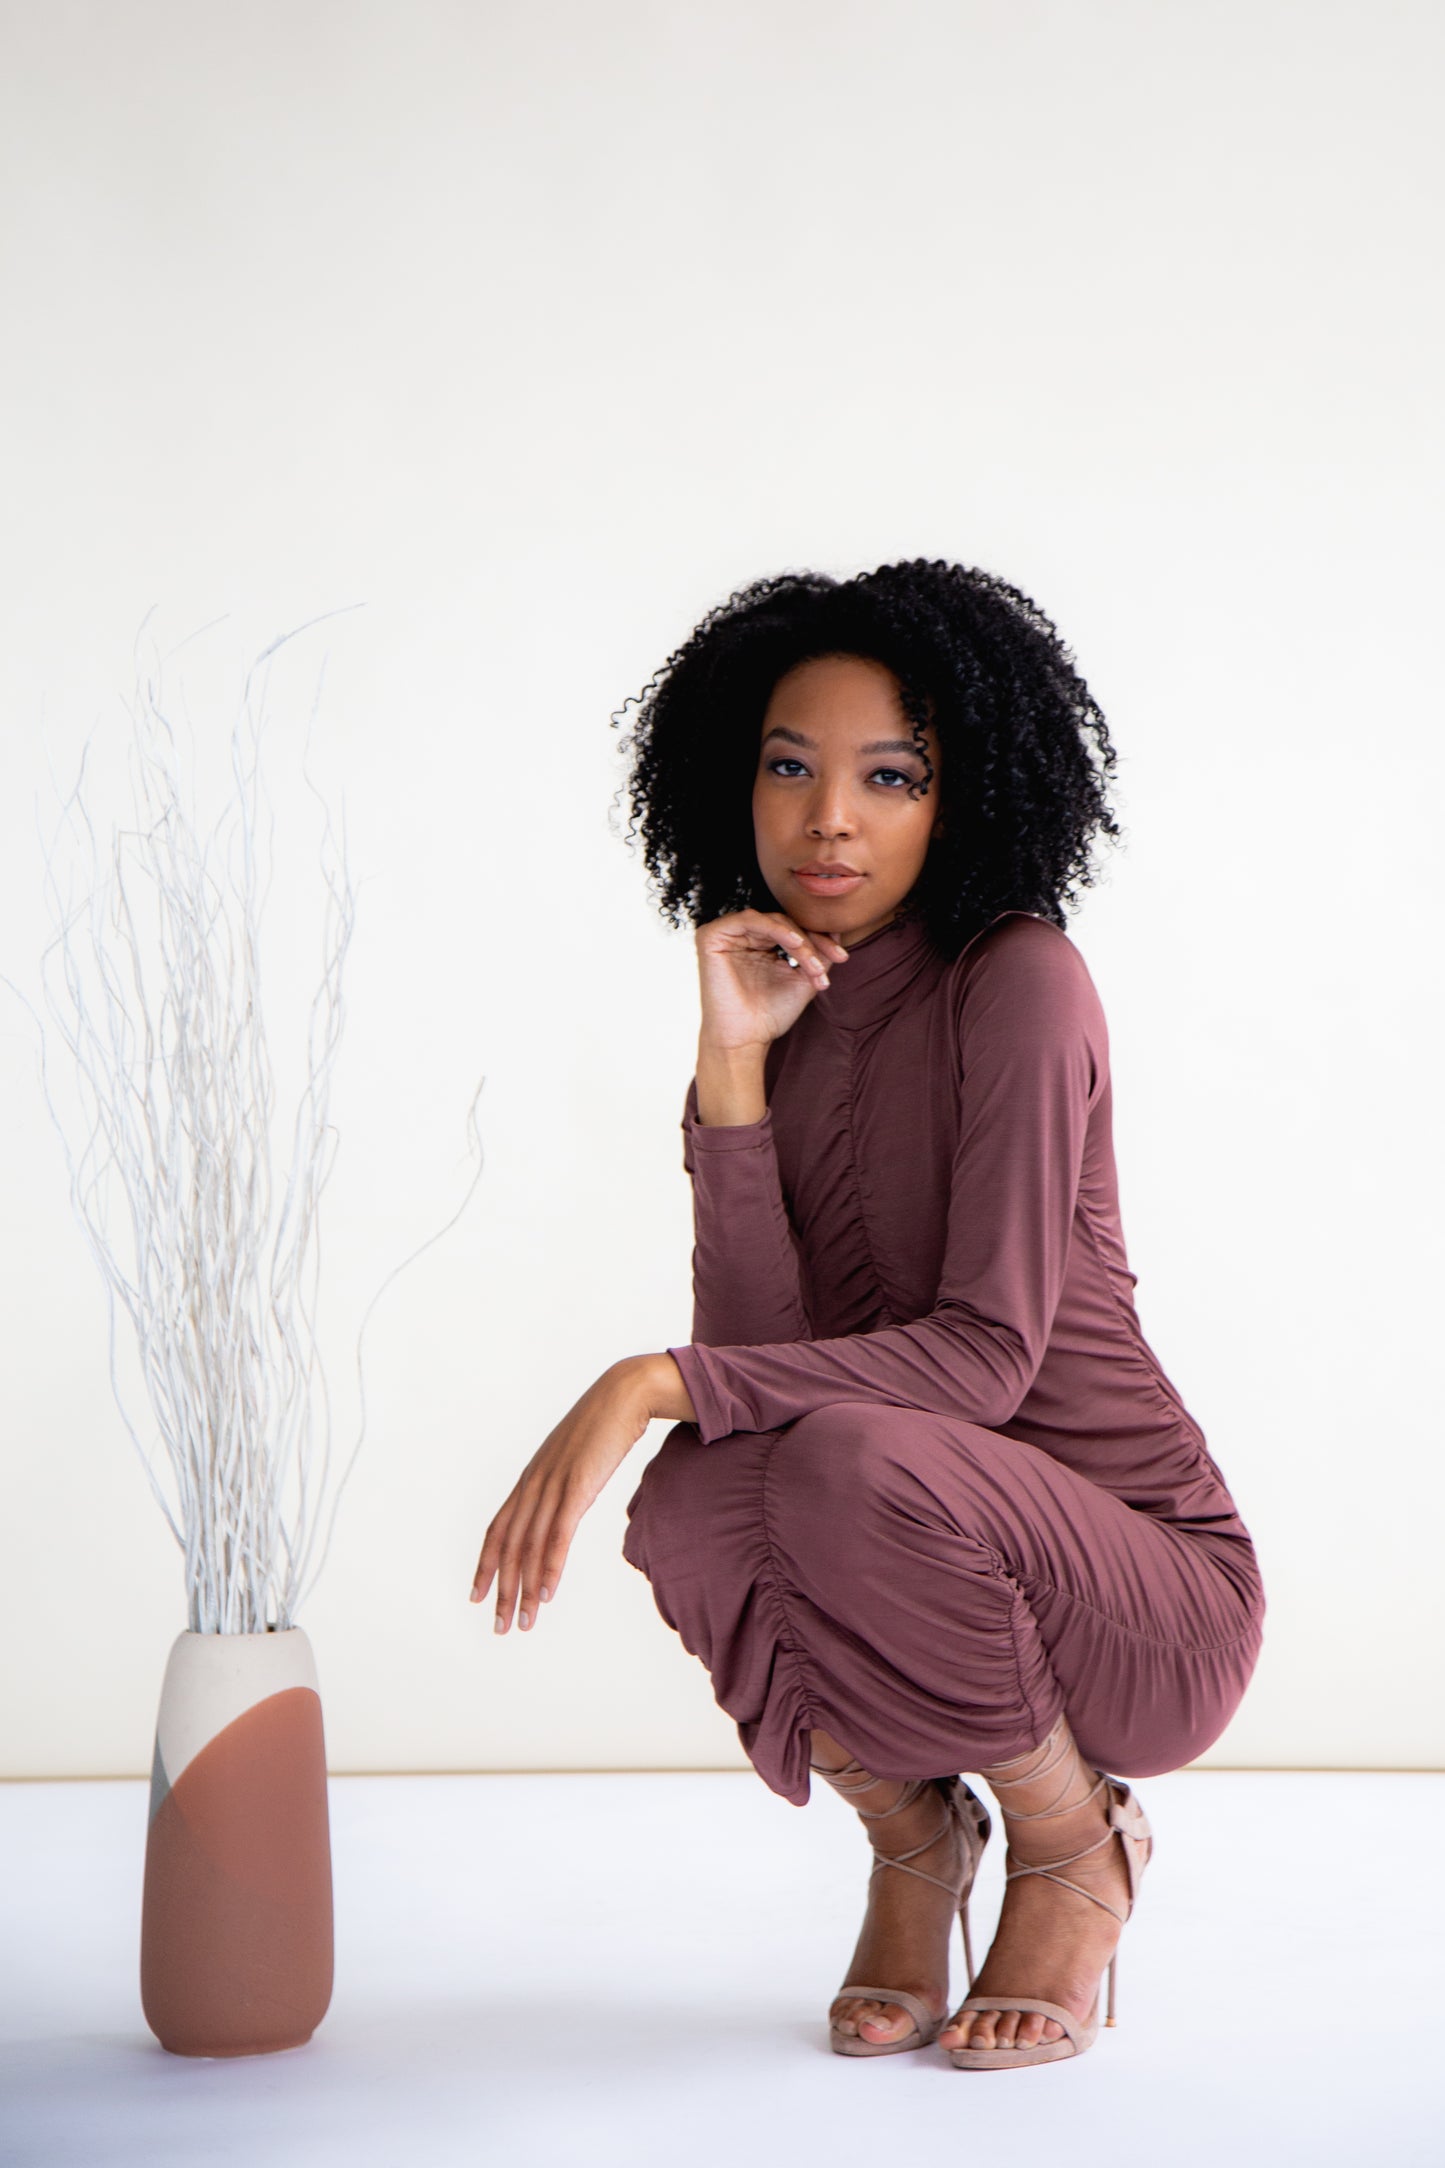 Chocolate recycled ruched midi dress